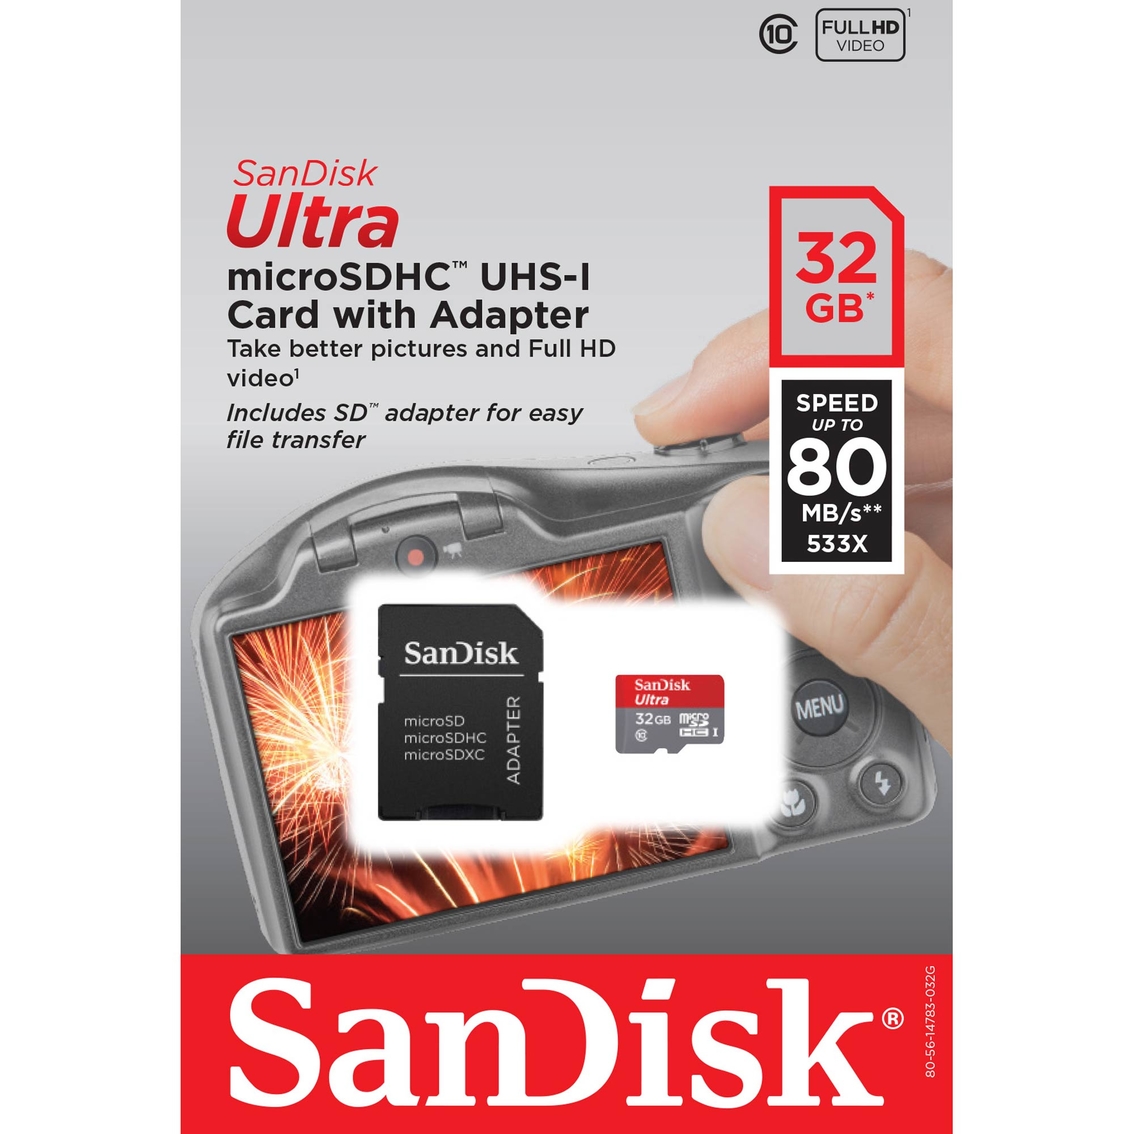 SanDisk Ultra 32GB MicroSD UHS-I Card with Adapter - Image 2 of 2